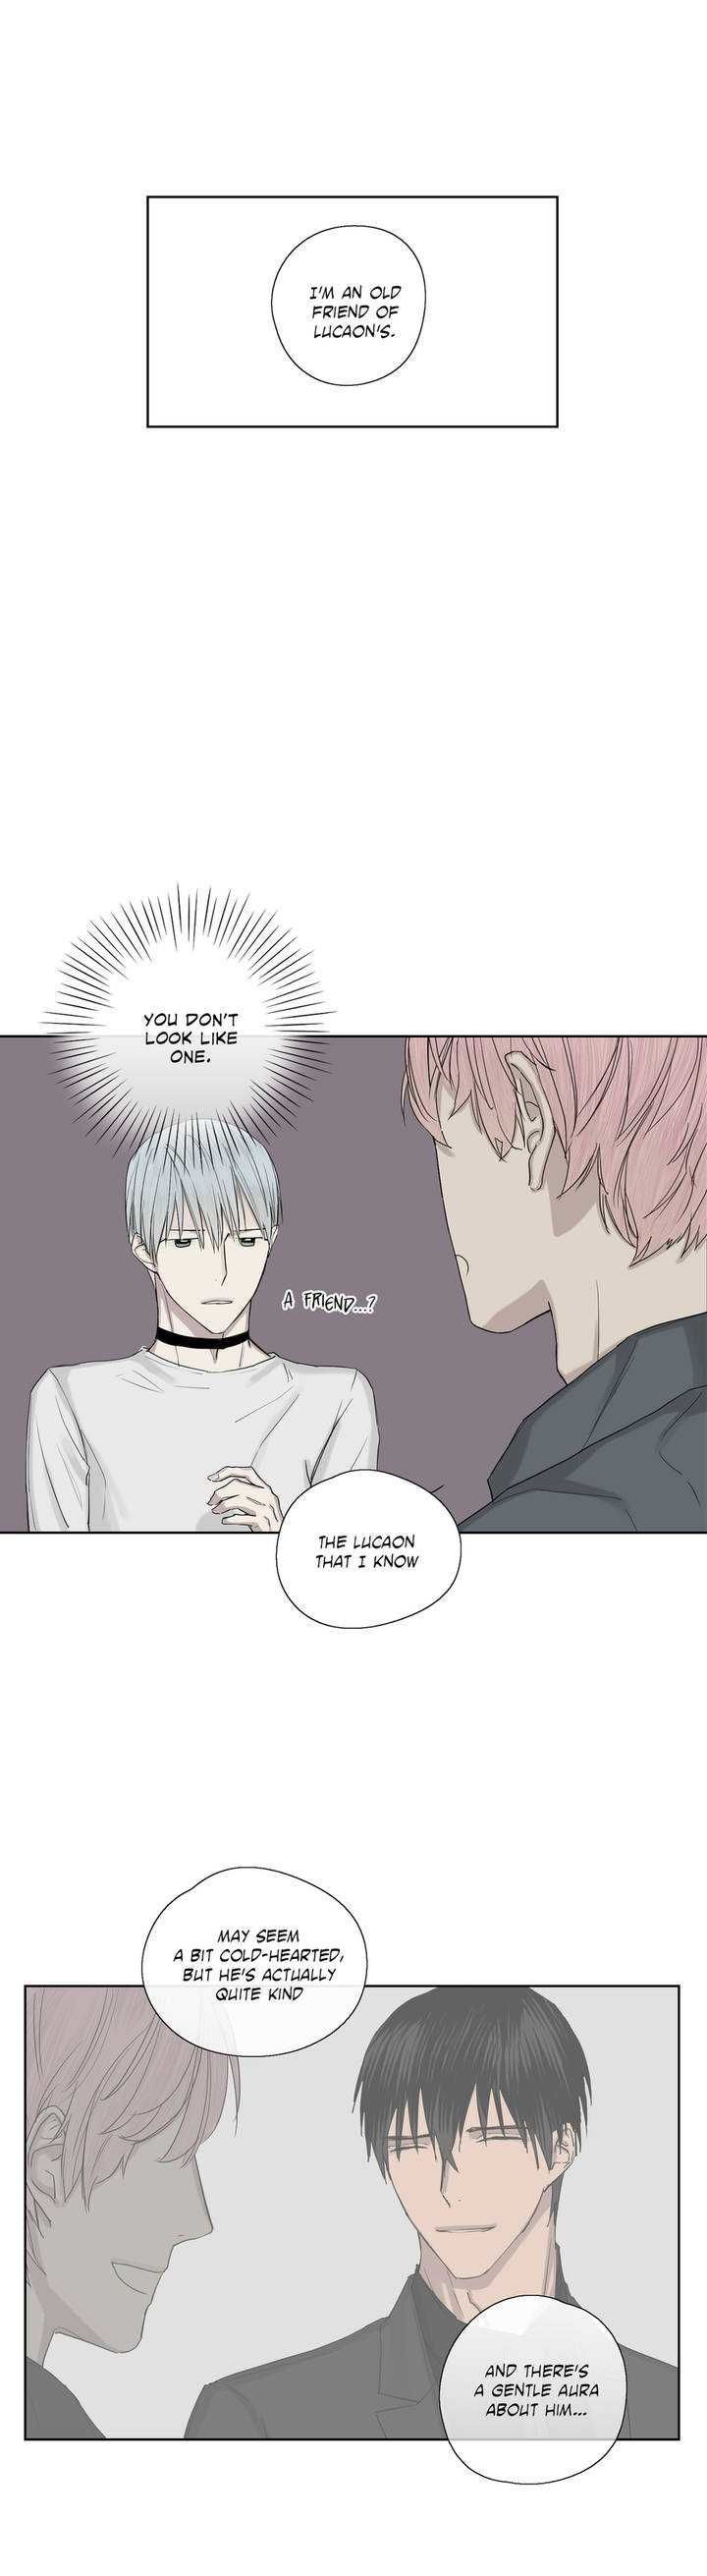 Royal Servant - Chapter 5 Page 4